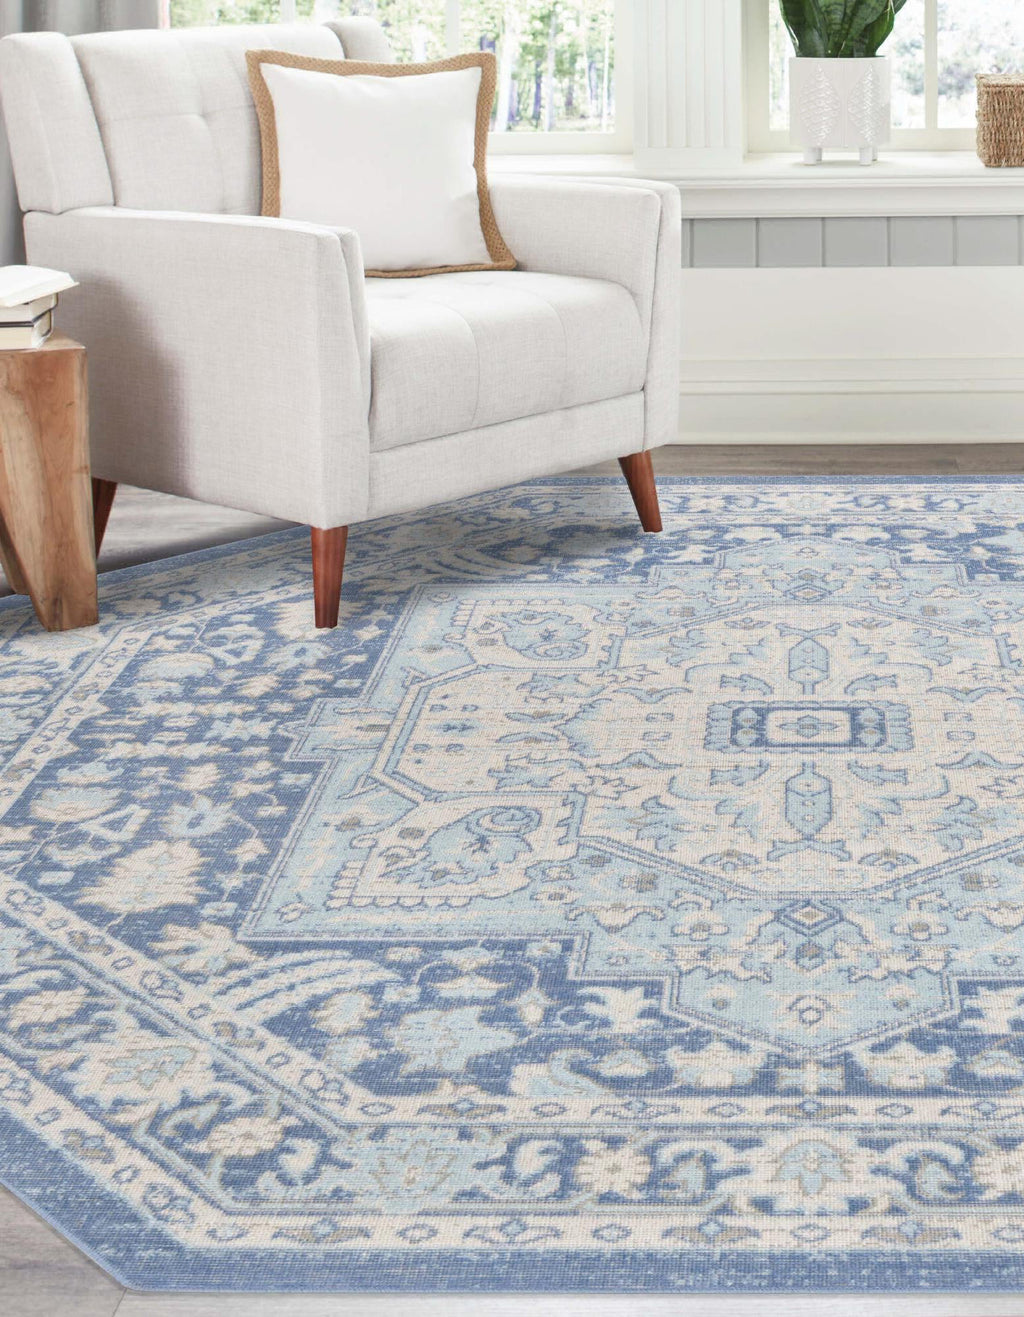 Unique Loom Whitney T-WHIT1 French Blue Area Rug Octagon Lifestyle Image Feature